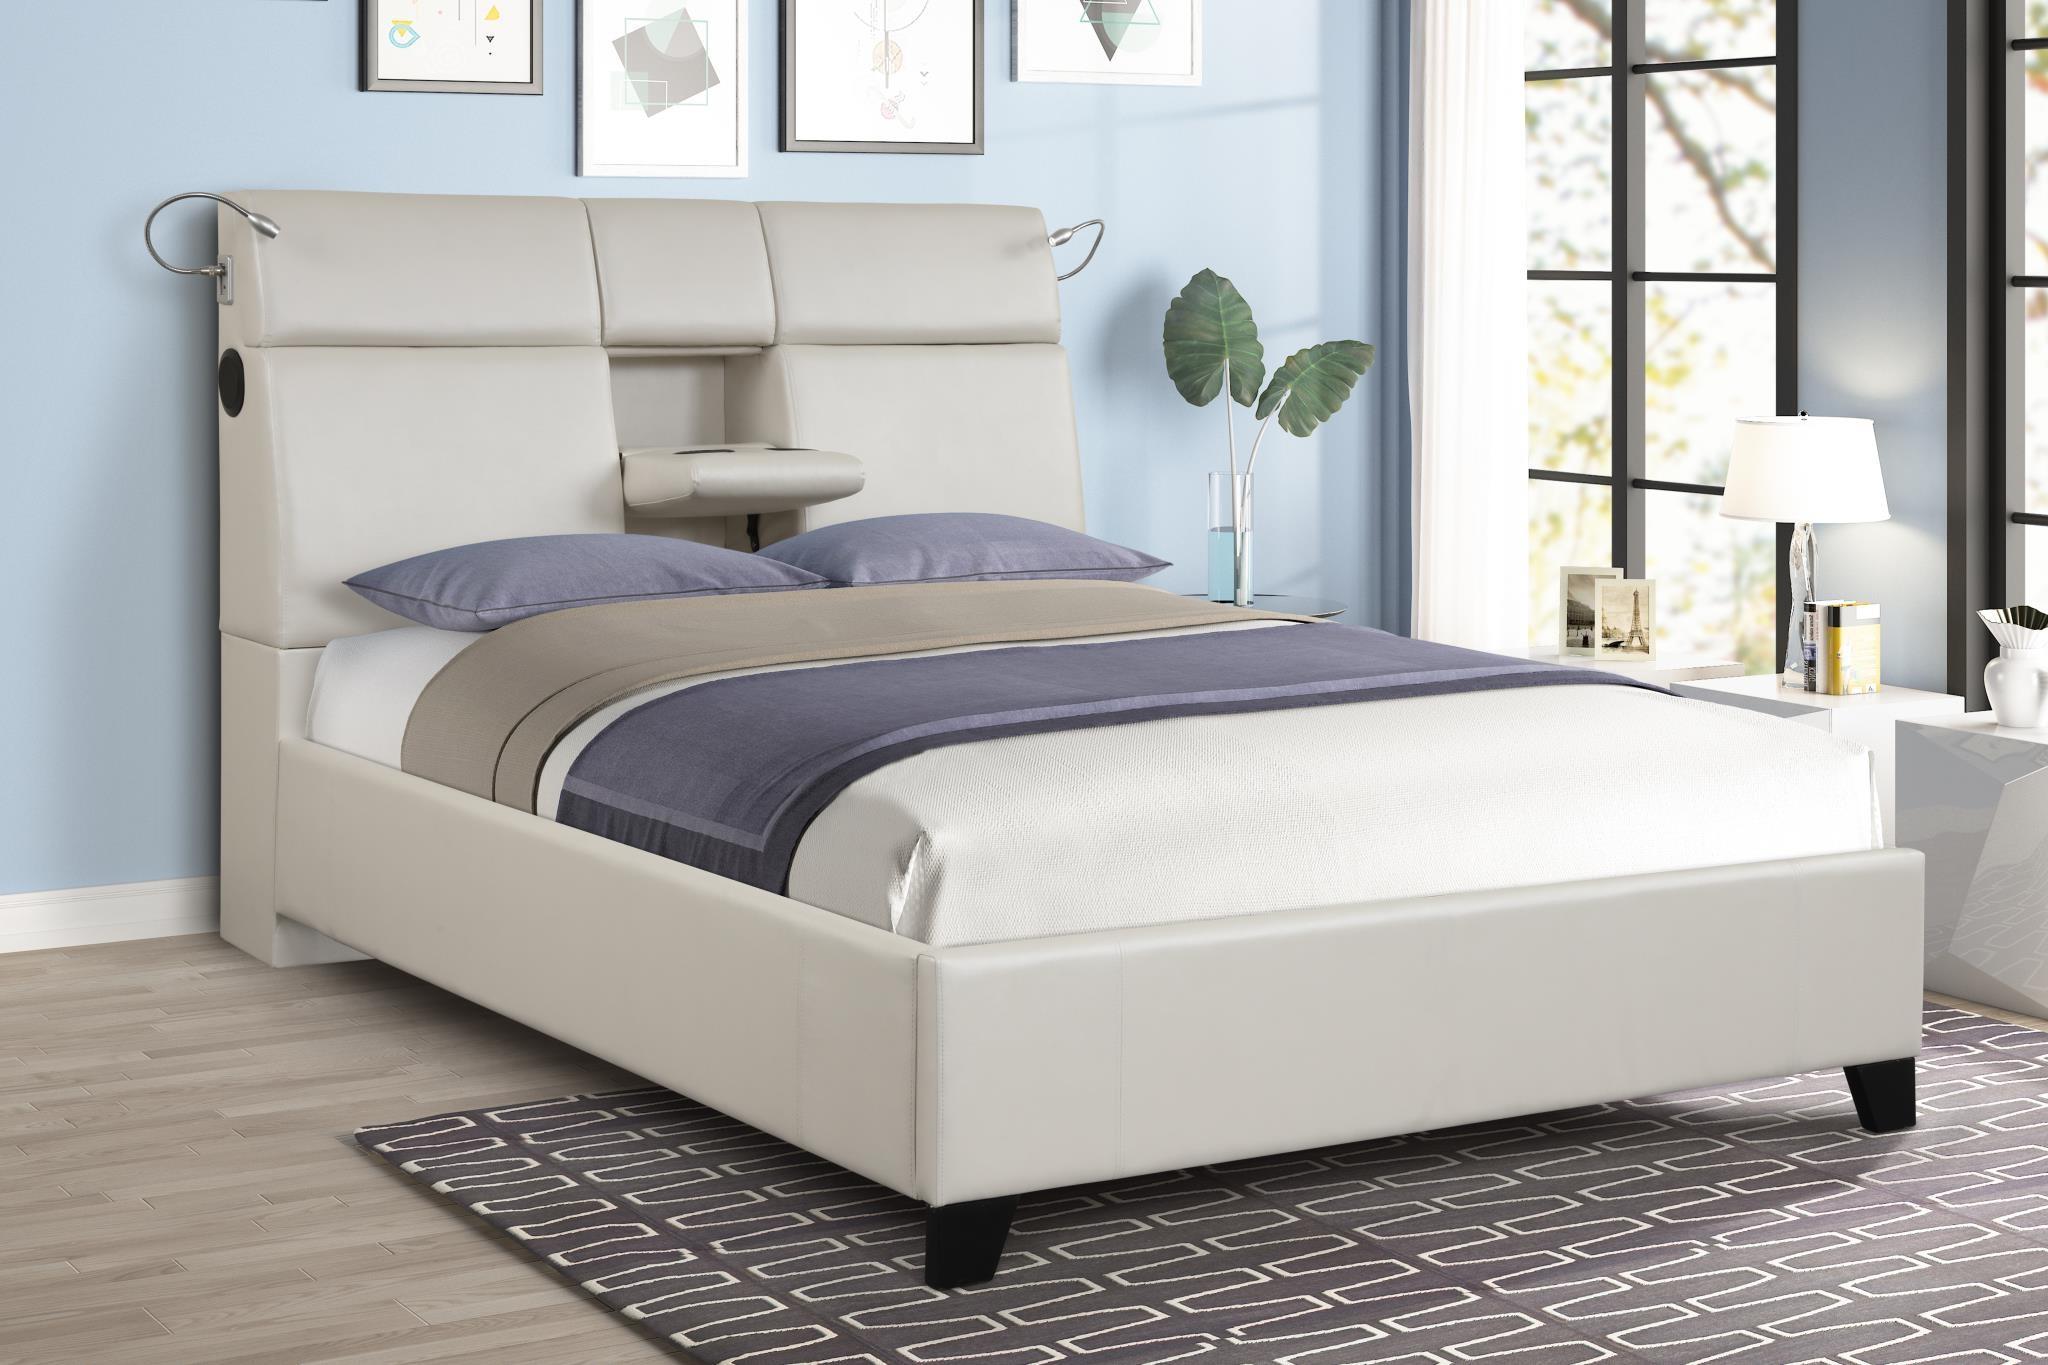 Modern, Transitional Panel Bed CALYPSO 1960-105 1960-105 in White Leather